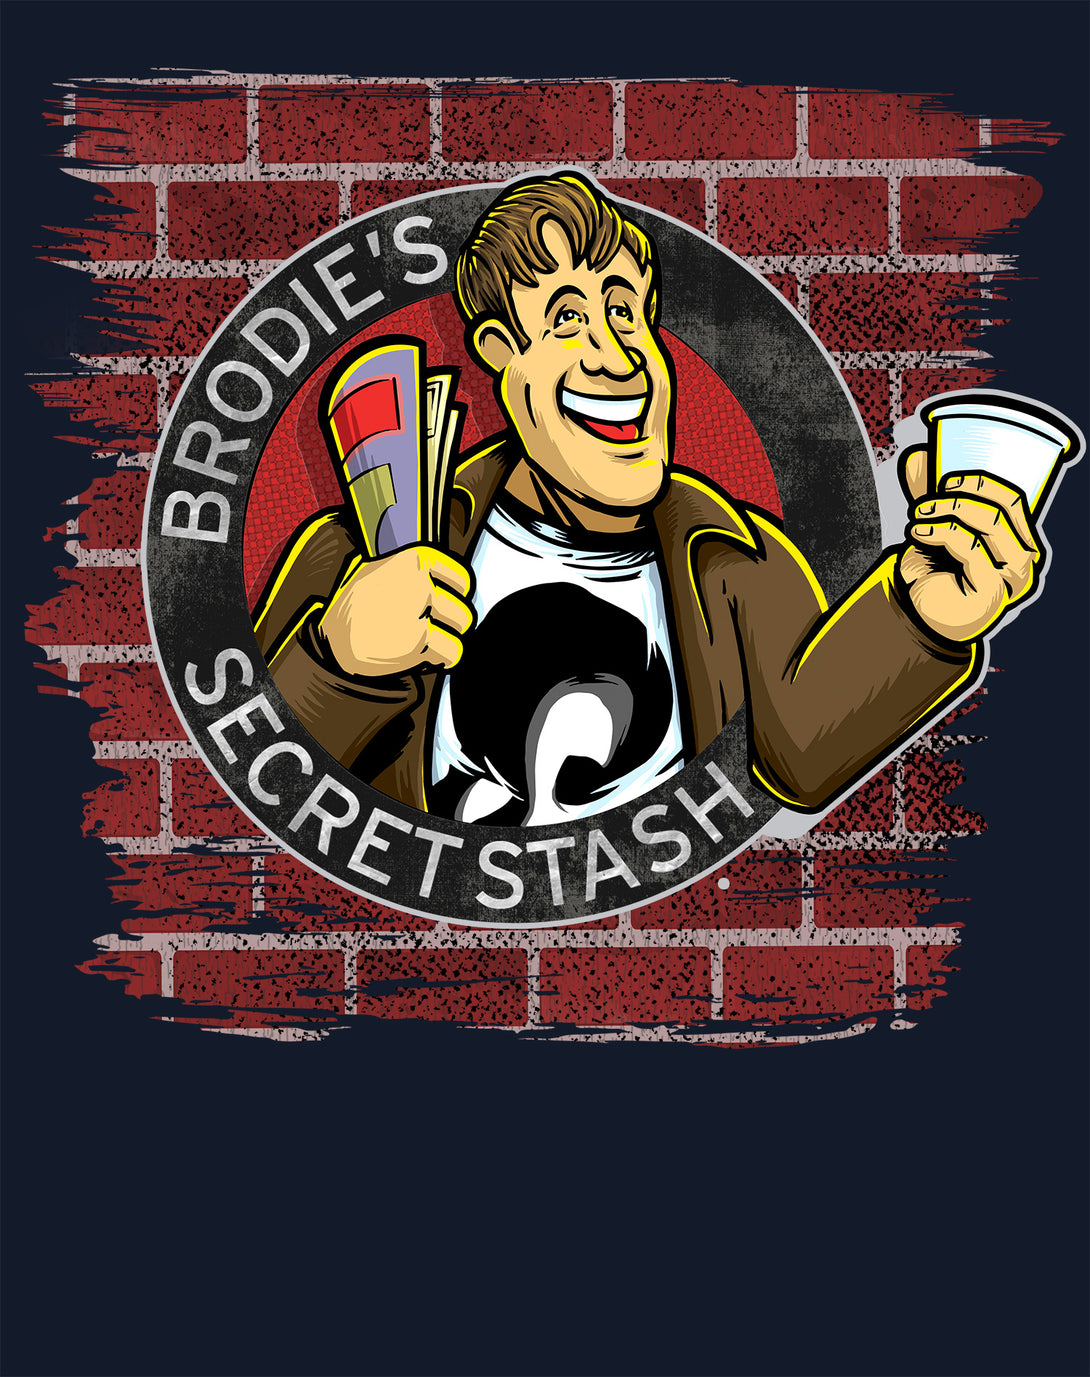 Kevin Smith Jay & Silent Bob Reboot Brodie's Secret Stash Store Logo Wall Official Men's T-Shirt Navy - Urban Species Design Close Up